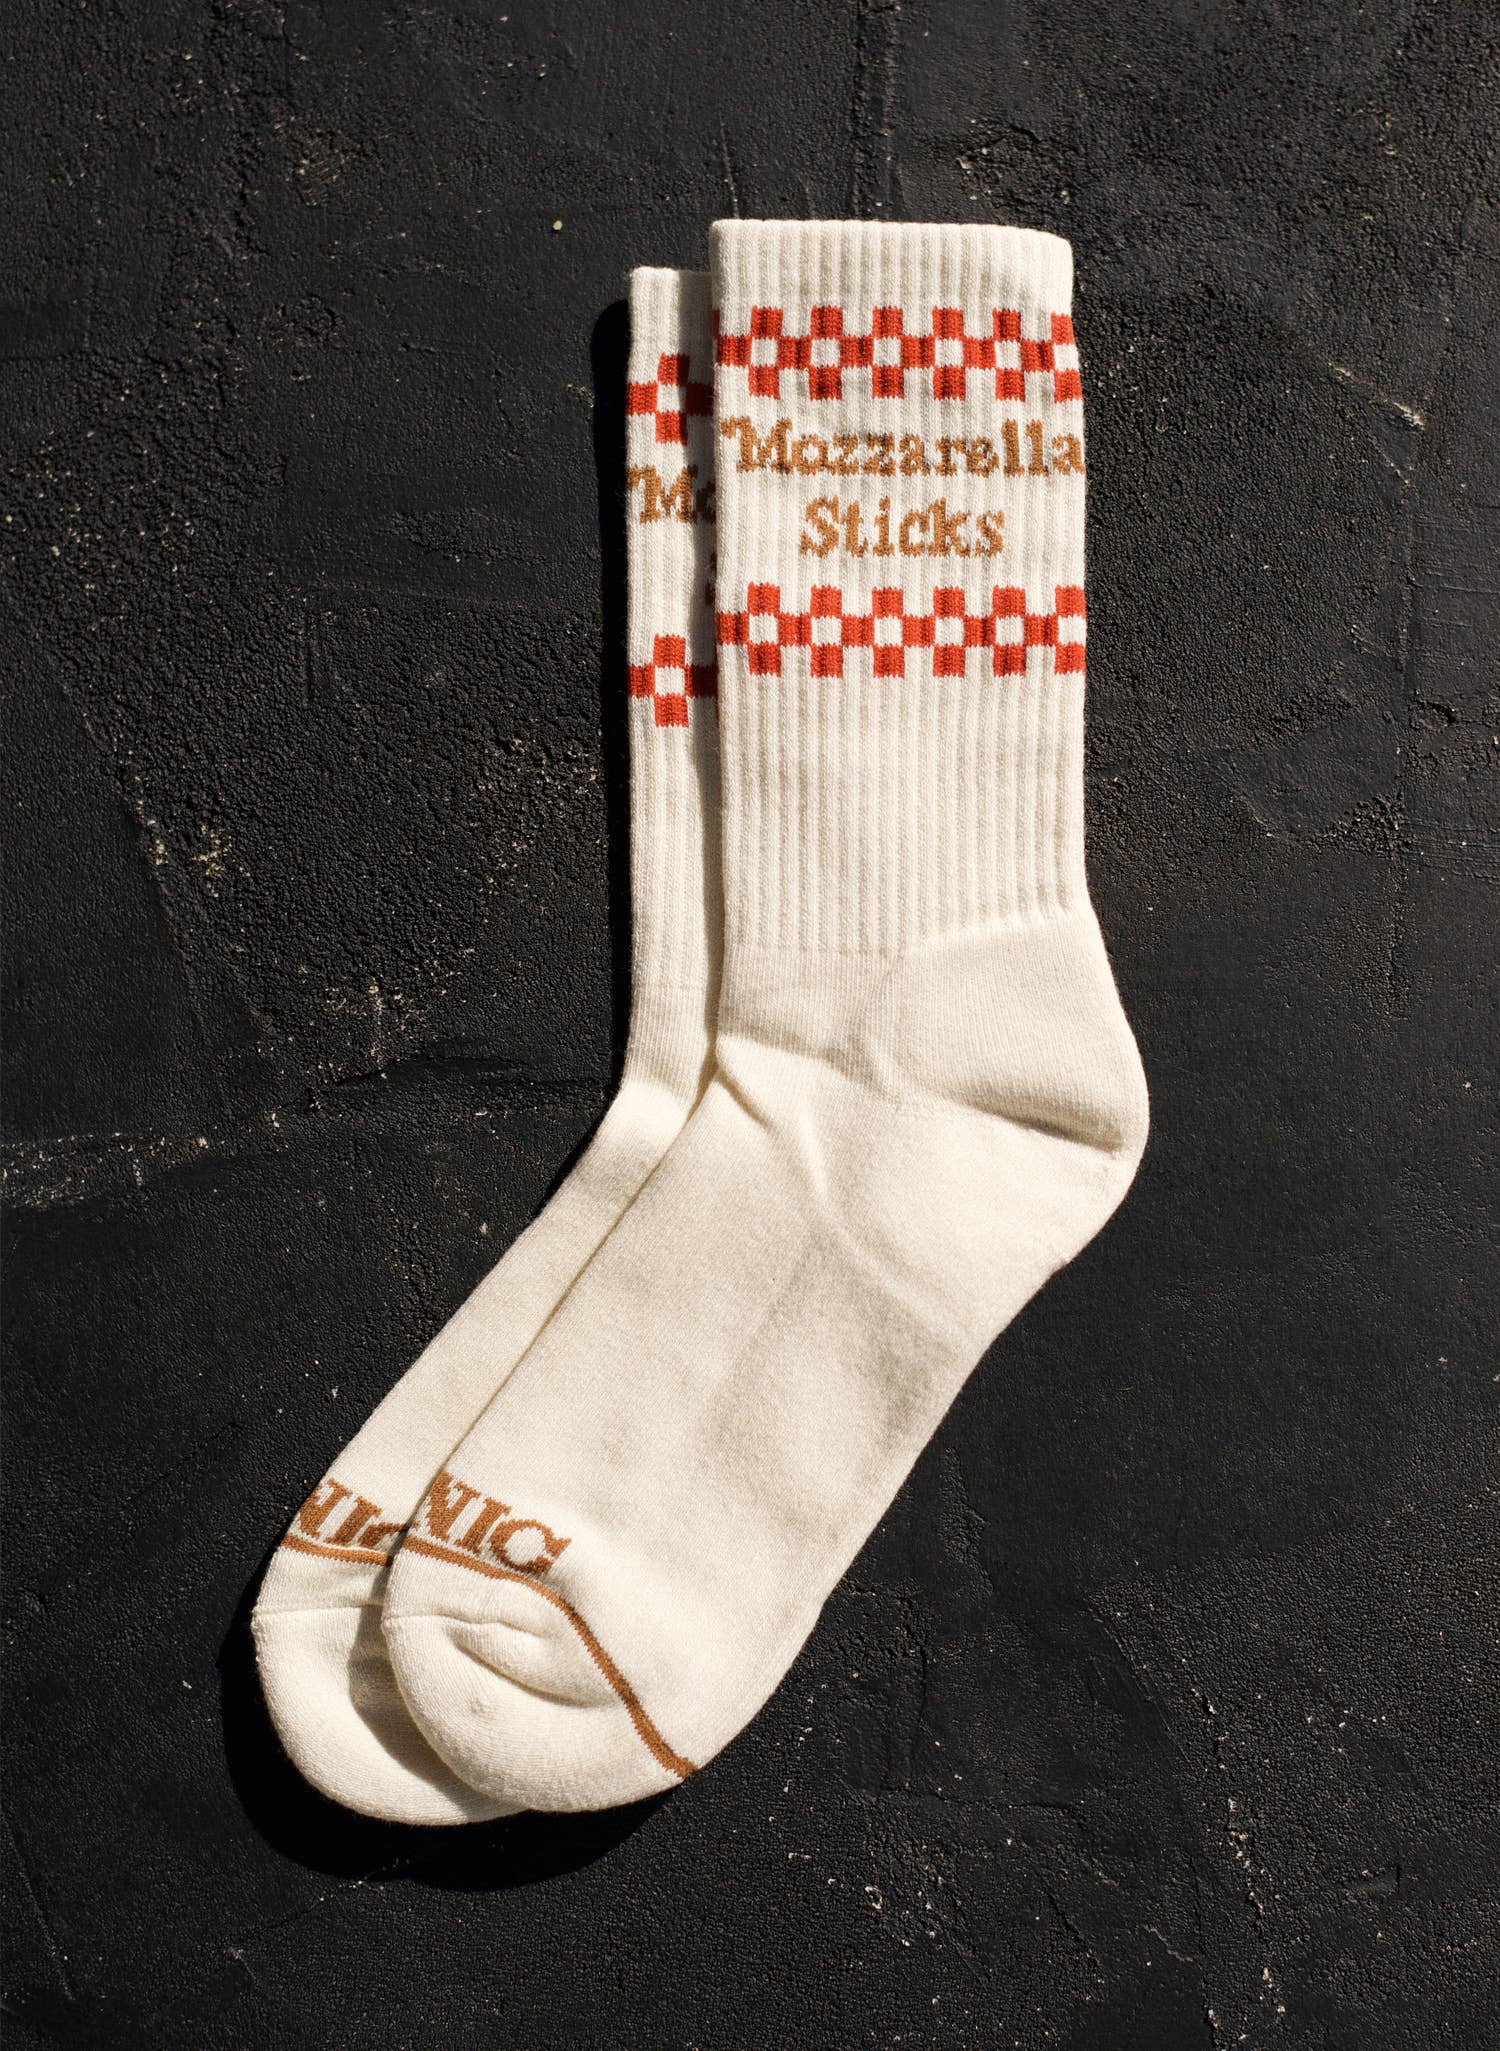 Cream colored socks -- on ribbed, ankle part it reads "Mozzarella Sticks" in between red and cream checker print 